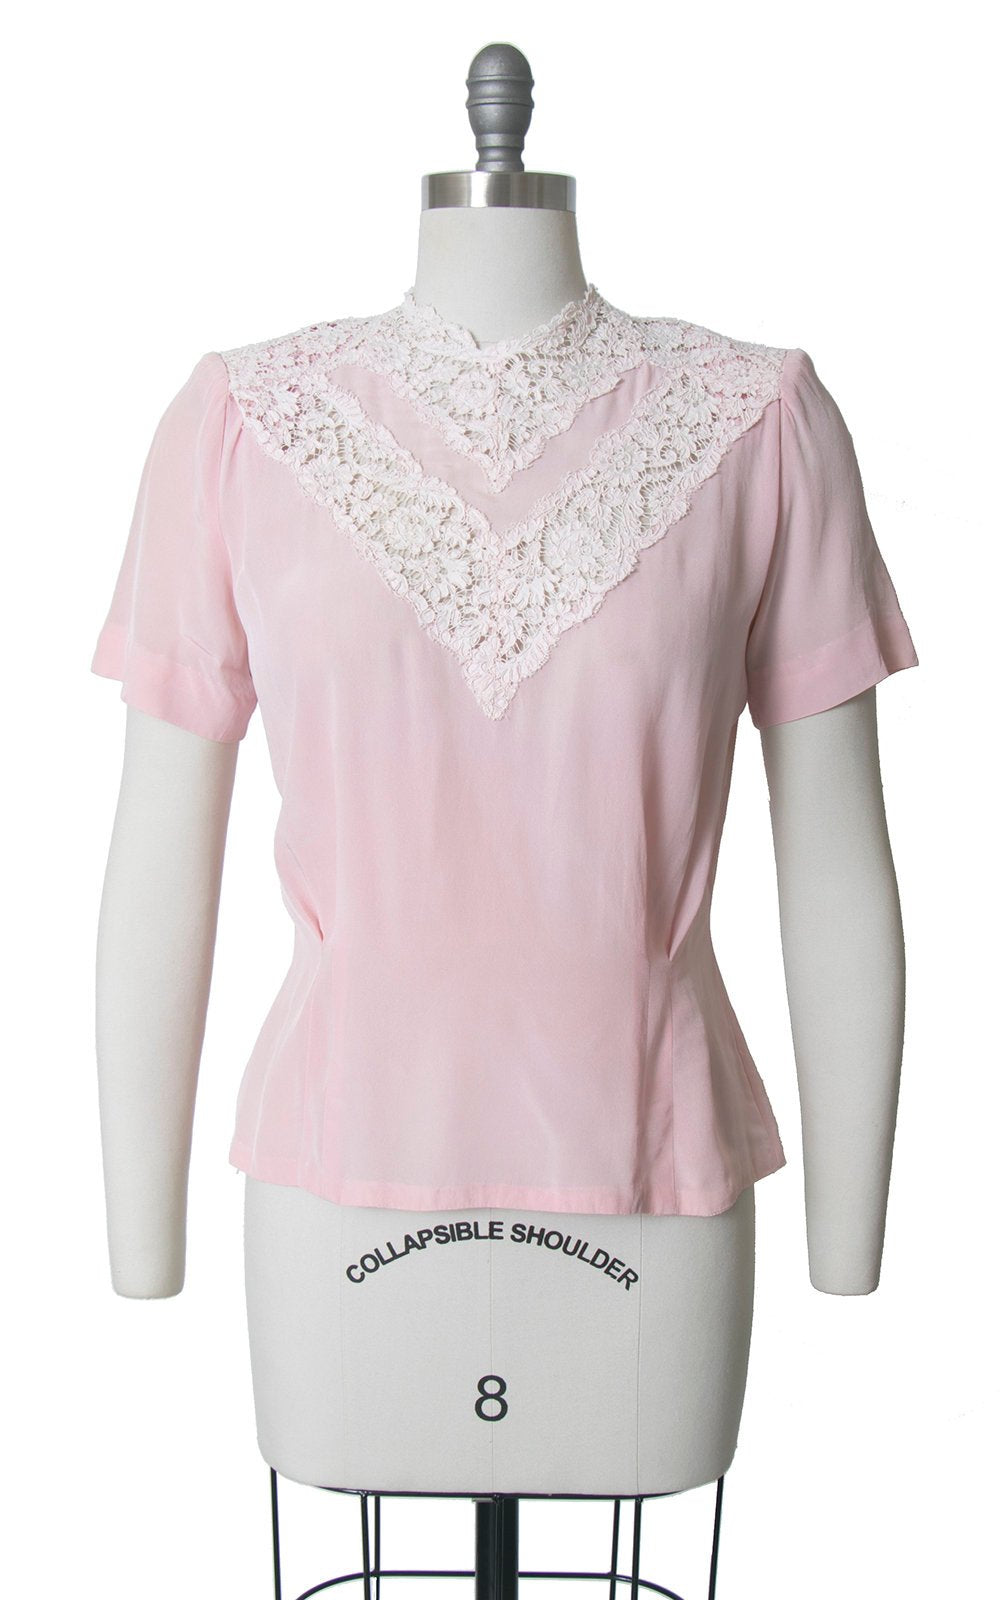 Vintage 1940s Blouse | 40s Rayon Lace Light Pink Button Back Short Sleeve Top (medium)